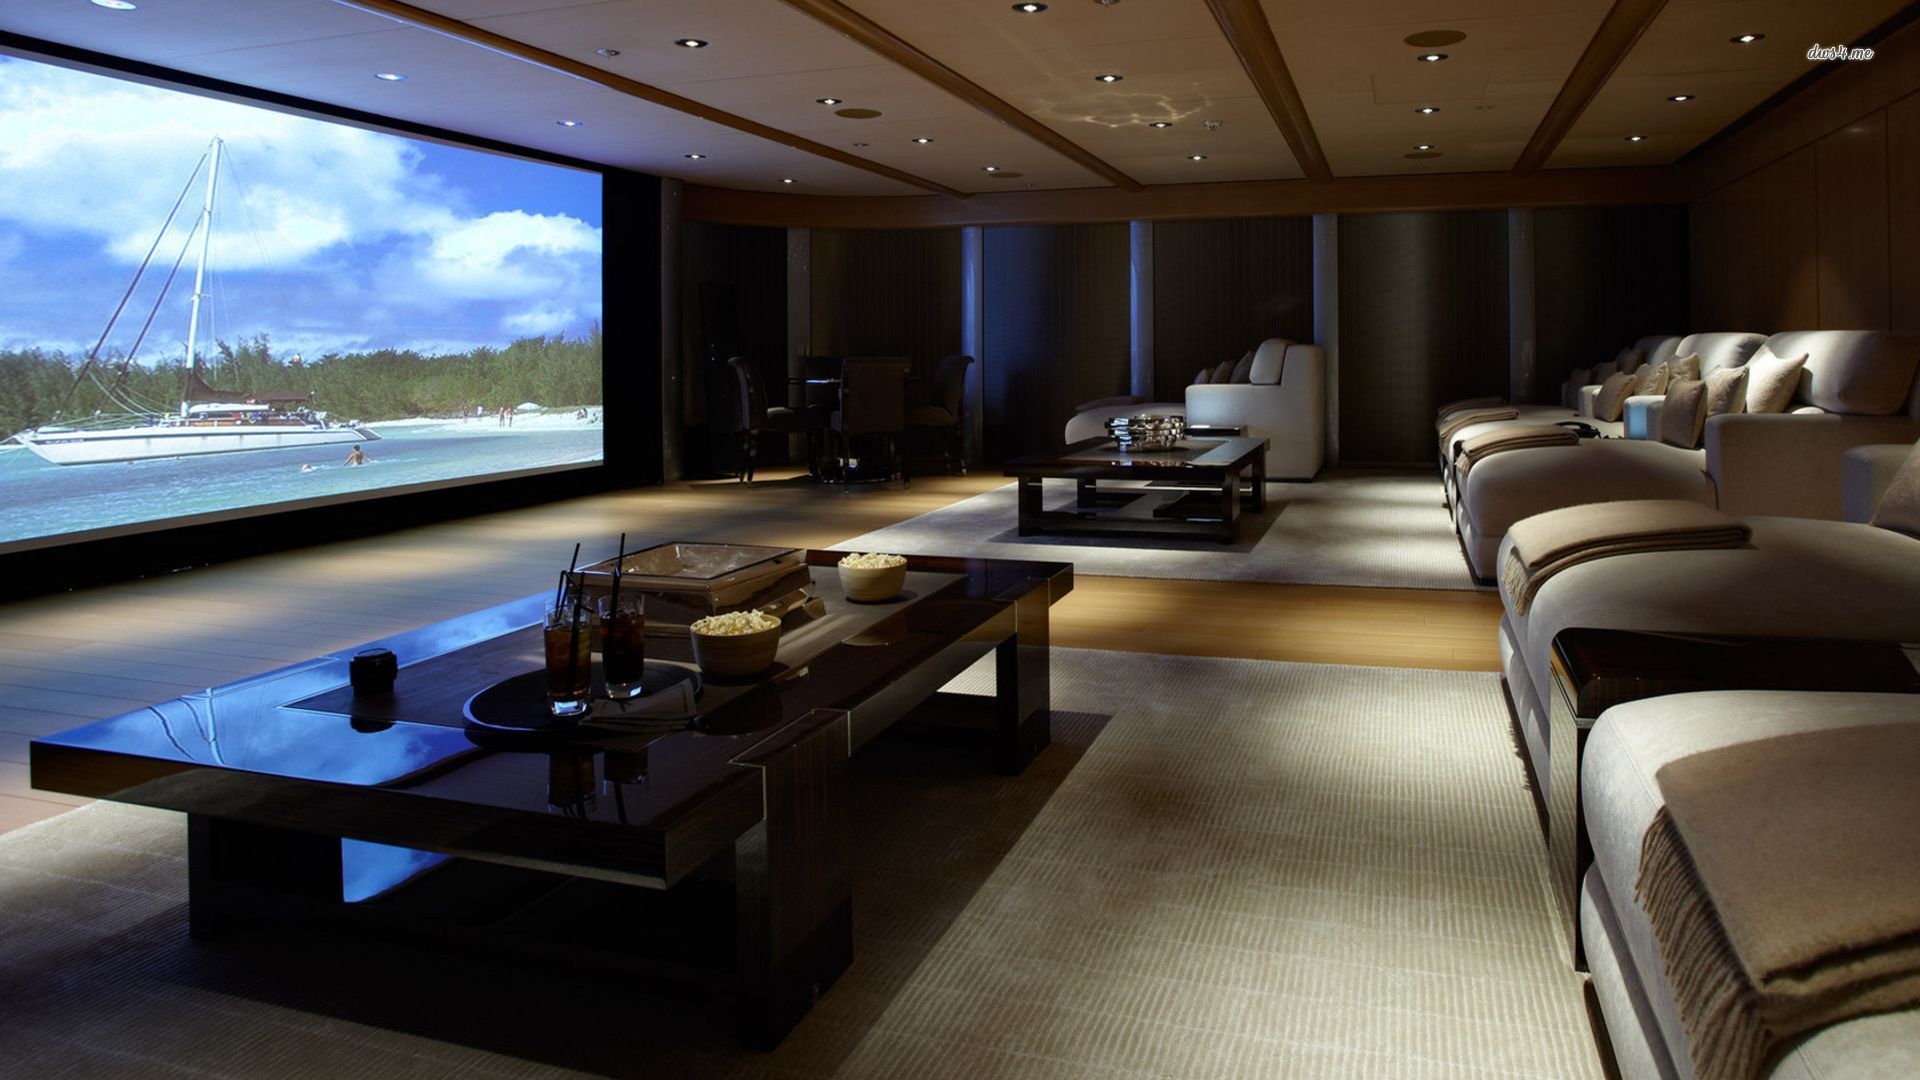 Home theatre wallpaper - Photography wallpapers